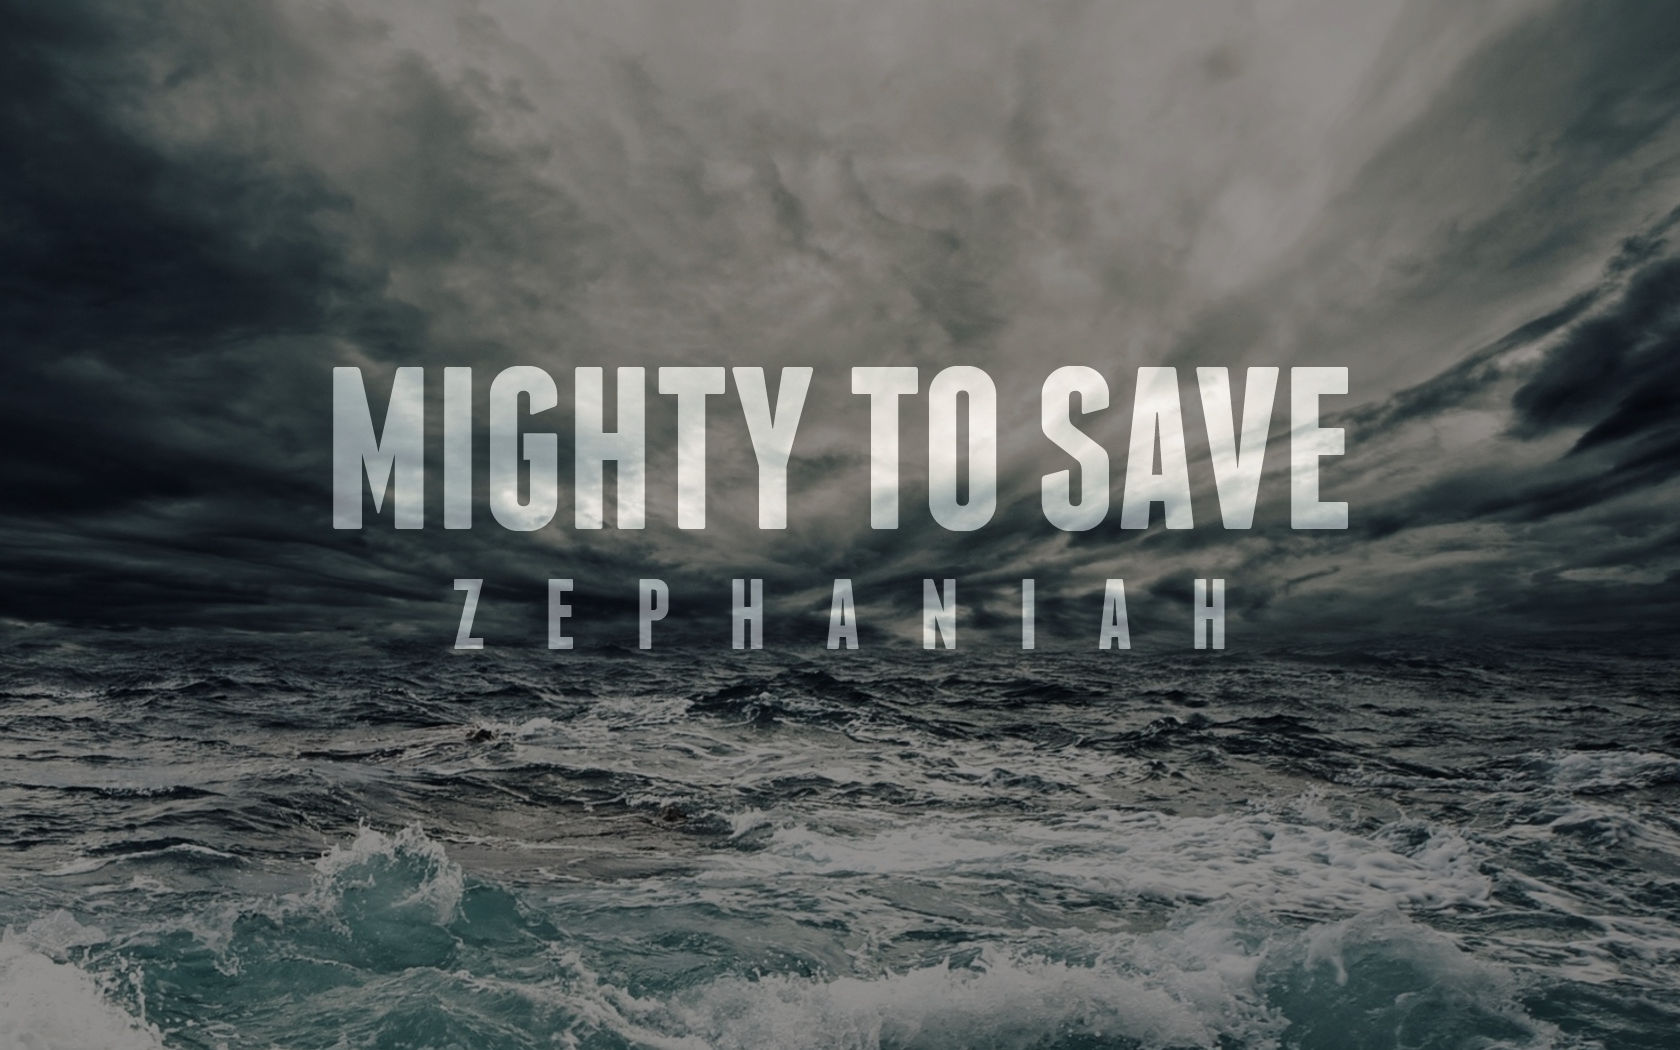 Zephaniah: Mighty to Save